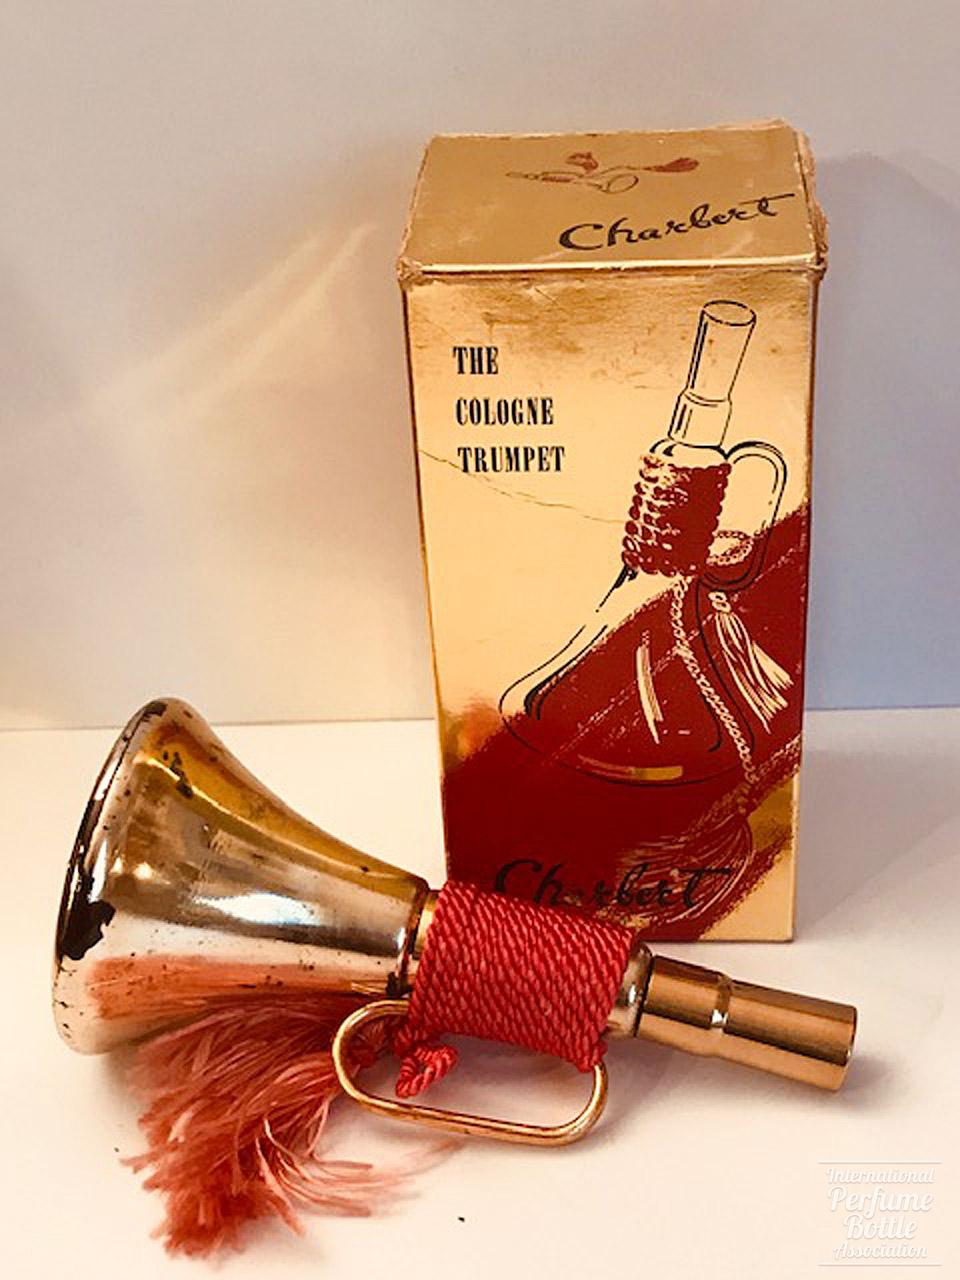 "Cologne Trumpet" Presentation by Charbert